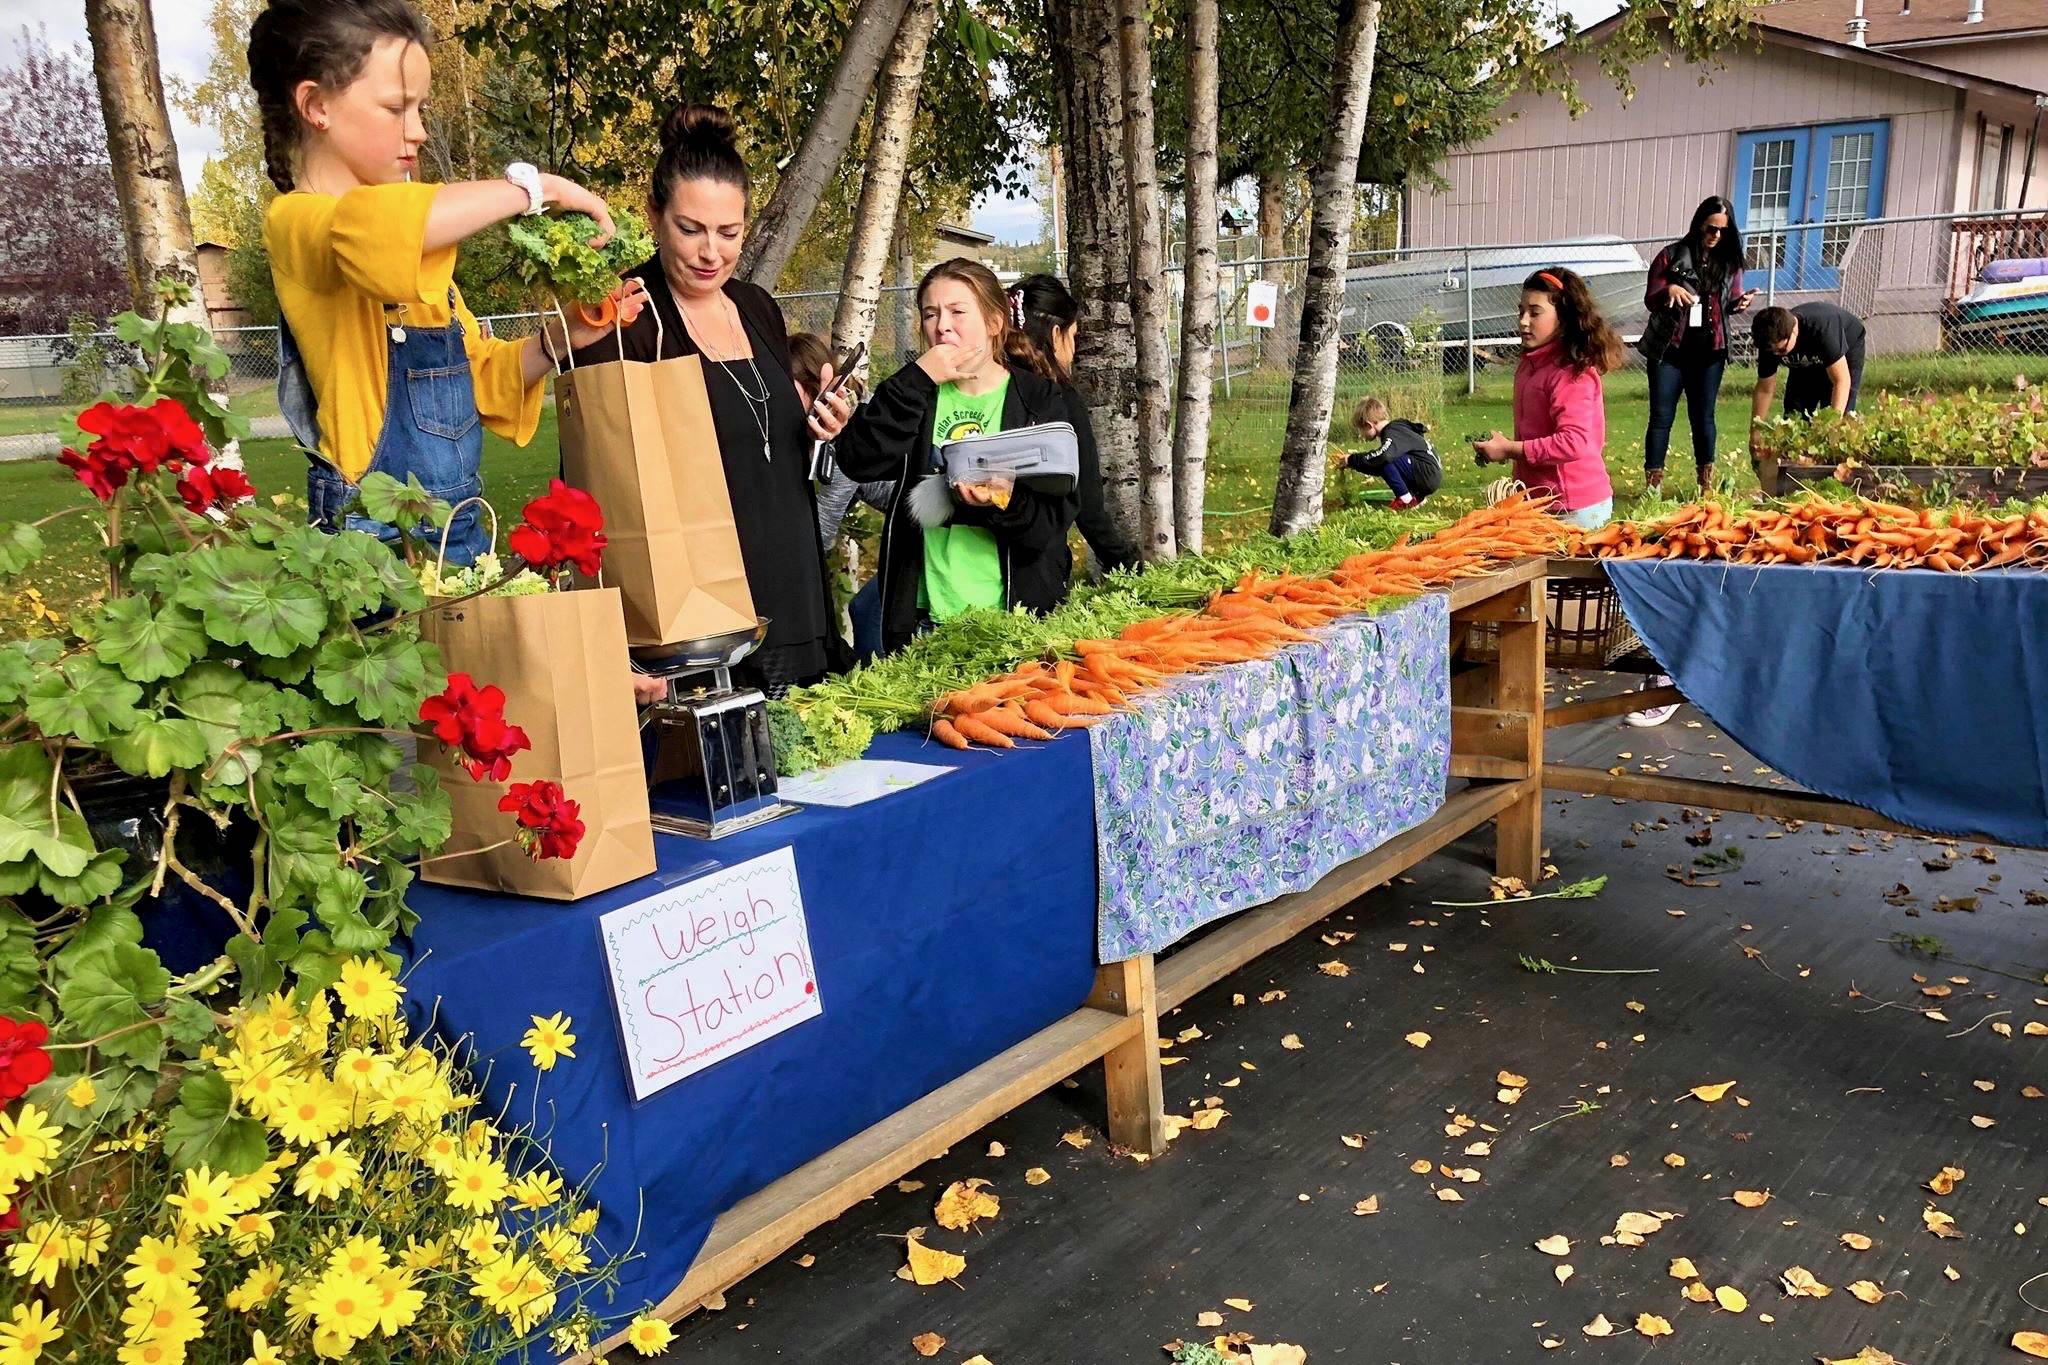 Students weigh vegetables for customers at the Soldotna Montessori Charter School Farmers Market on Thursday, Sept. 20, 2018, in Soldotna, Alaska. (Photo by Victoria Petersen/Peninsula Clarion)